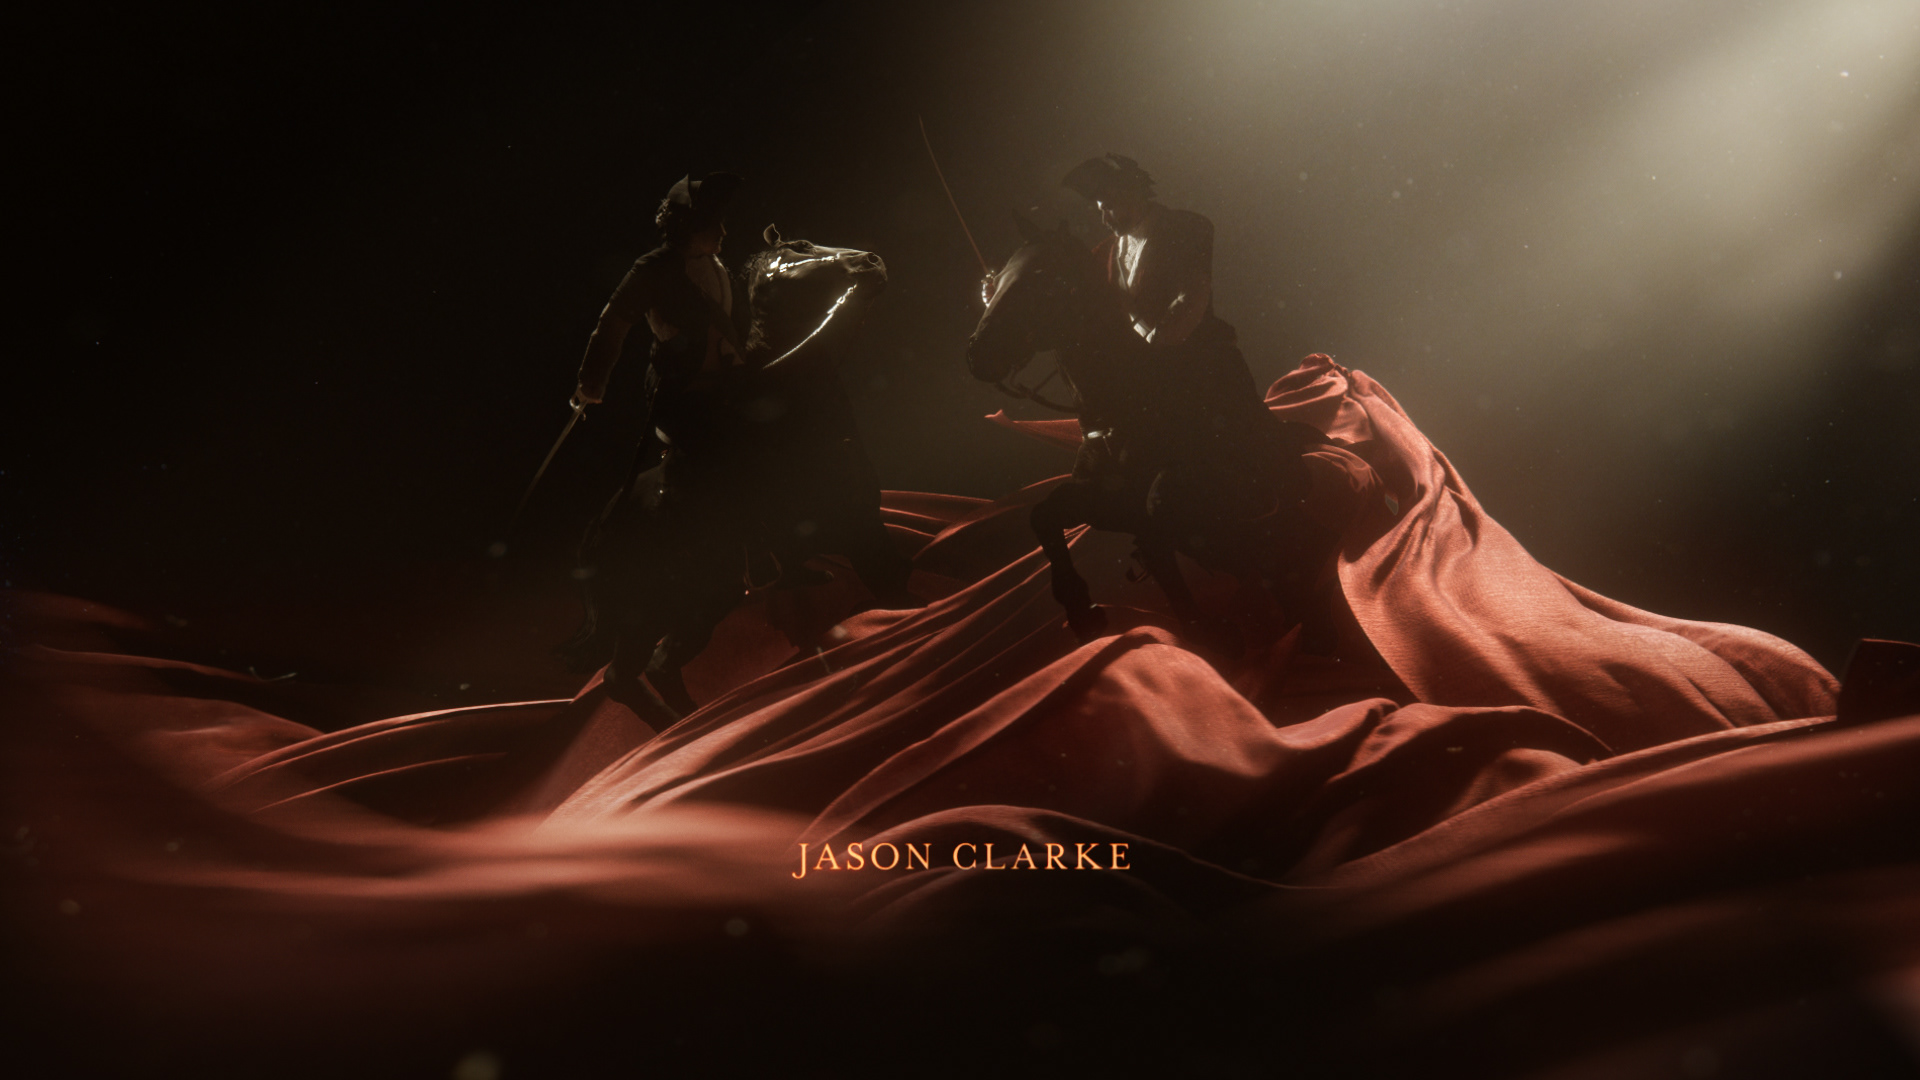 Catherine The Great HBO - Main Title Sequence on Behance7bc0f091516489.5e37cc71413cb.jpg